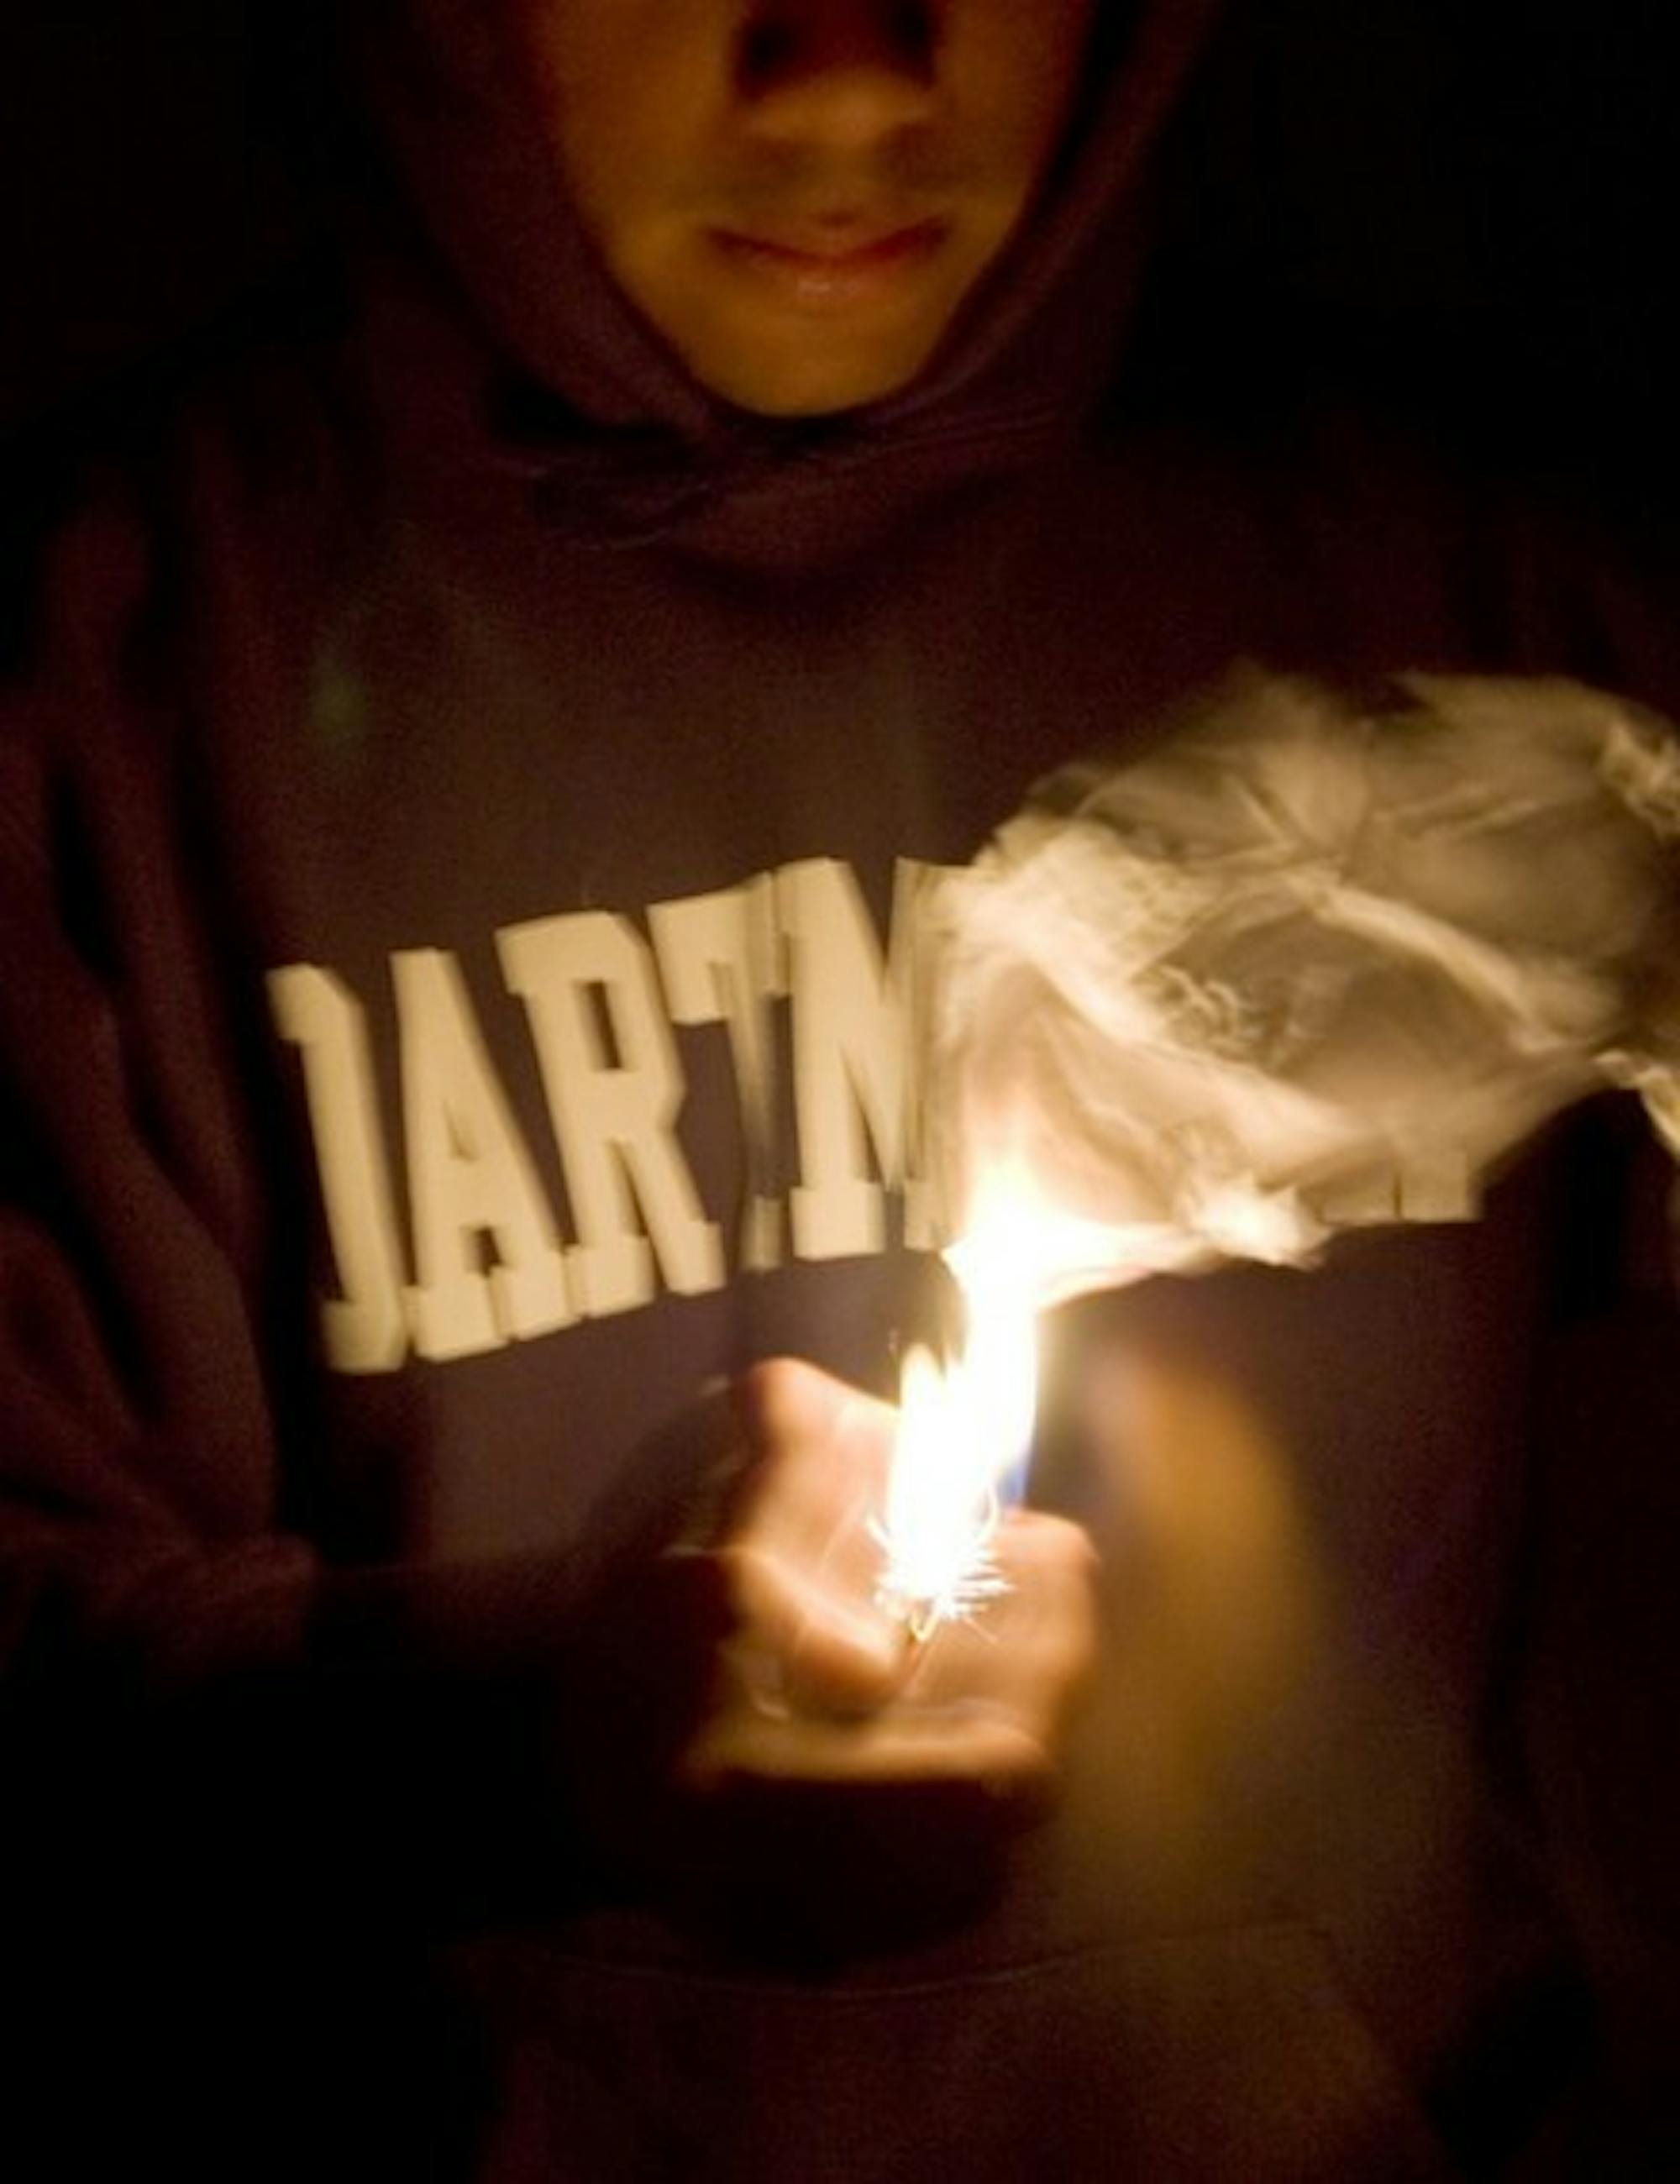 Arson has occurred at Dartmouth more than any other Ivy League school in the past two years.